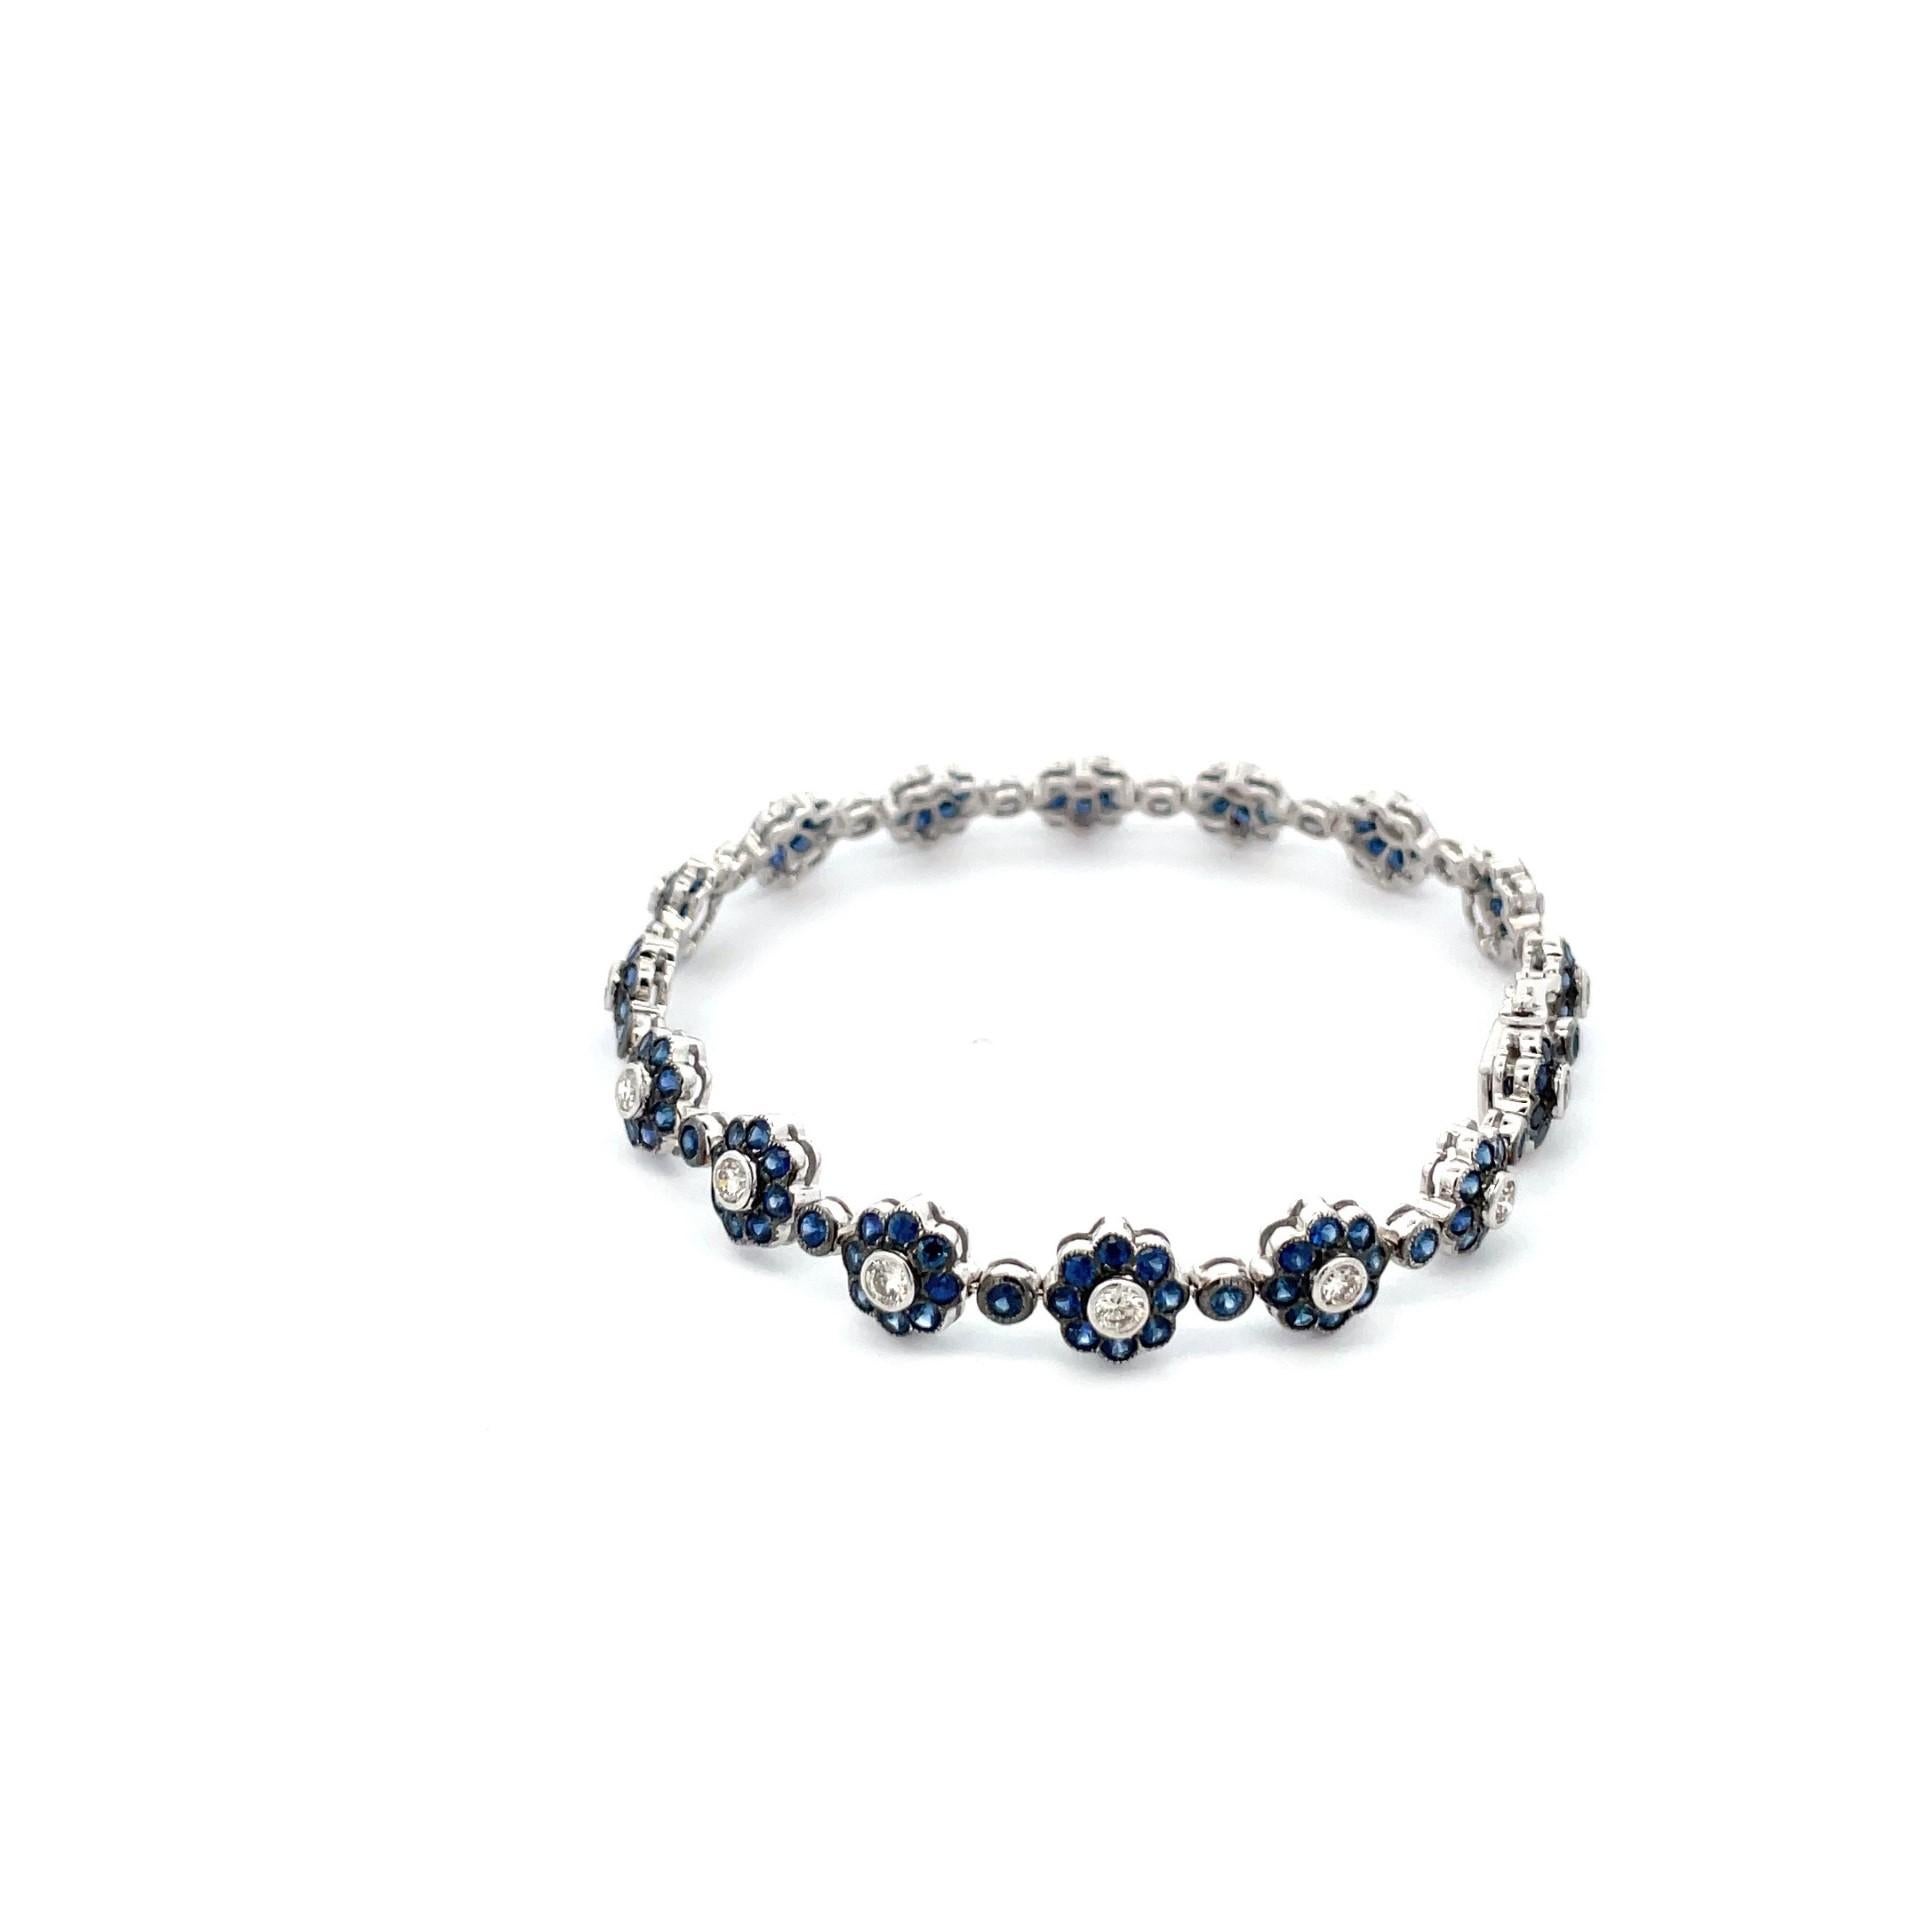 A gorgeous flower bracelet in 18kt white gold with natural blue sapphires and brilliant cut diamonds. An elegant casual look for everyday.

144 natural pink sapphires weighing 5.00ct total weight

16 brilliant cut diamonds weighing 1.43ct total